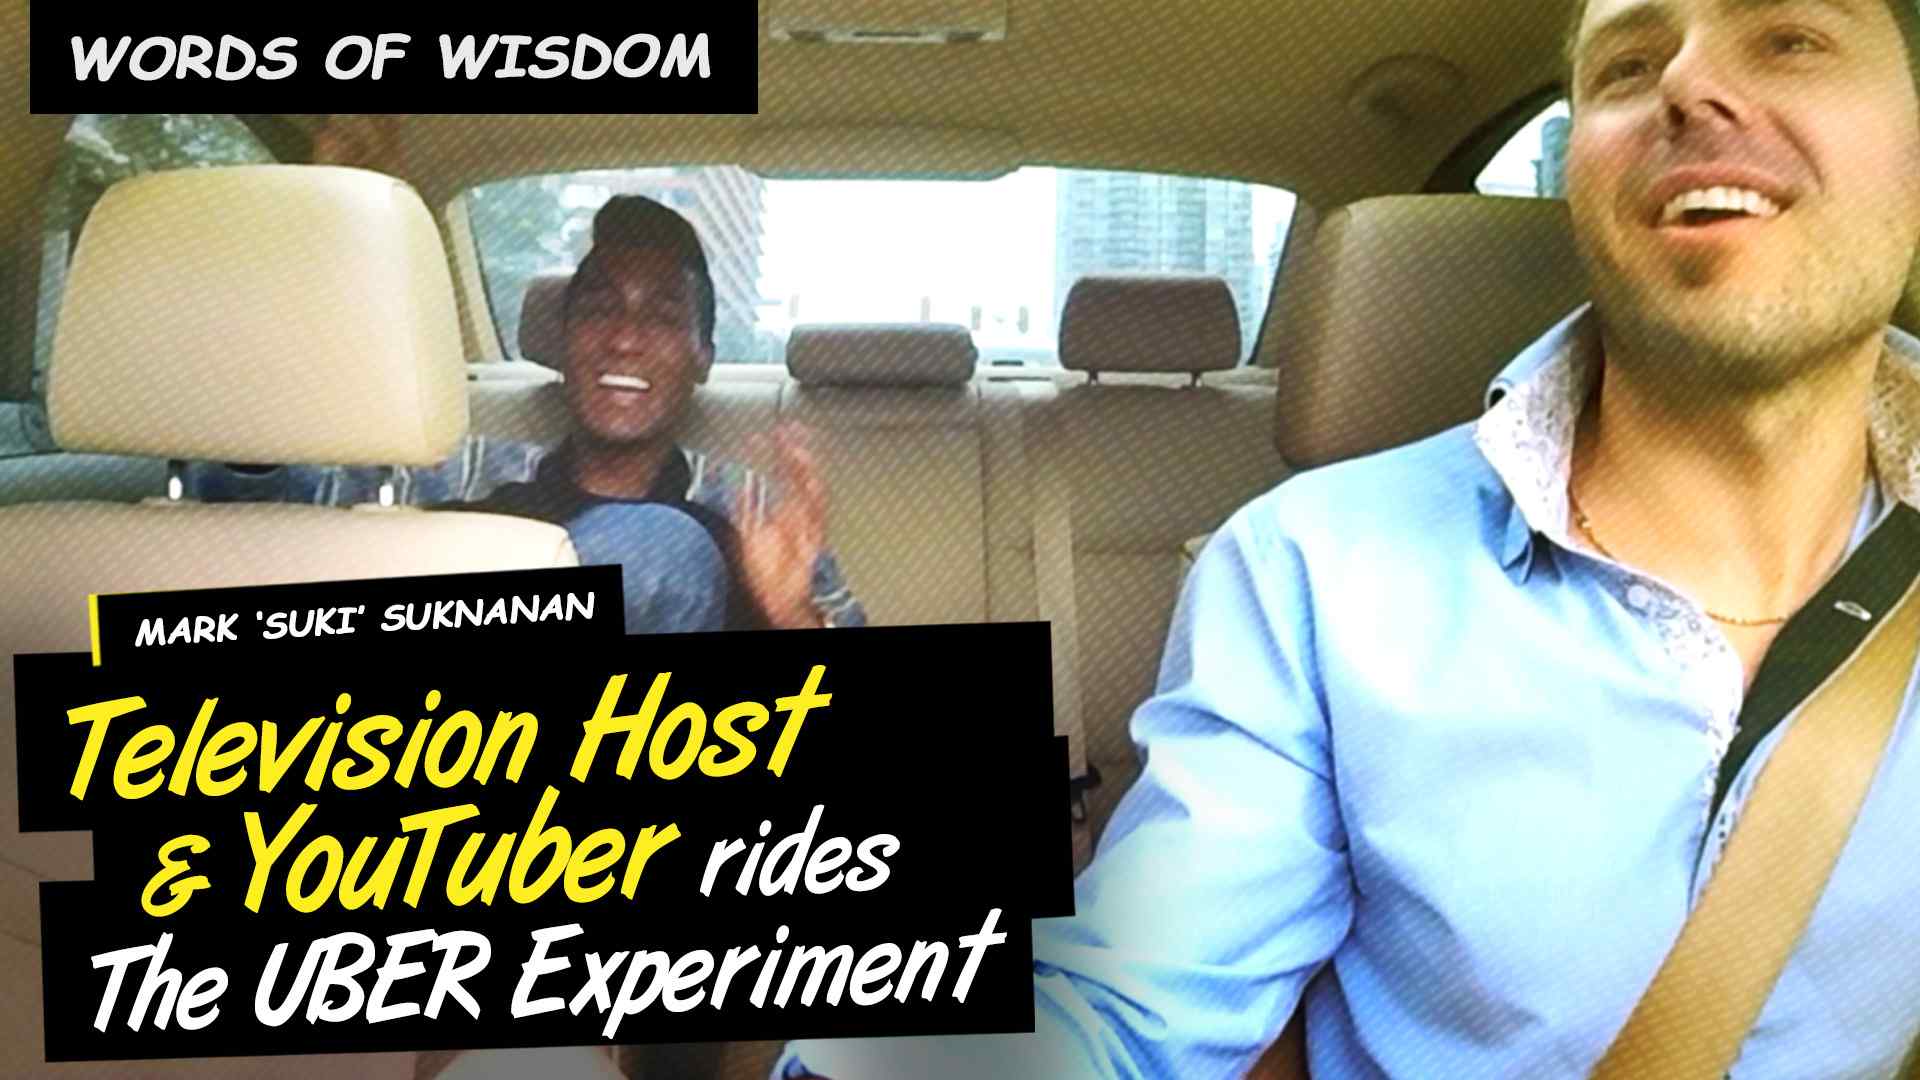 Words of Wisdom by TV Host & Youtuber Mark SUKI Suknanan on The UBER Experiment Reality Show